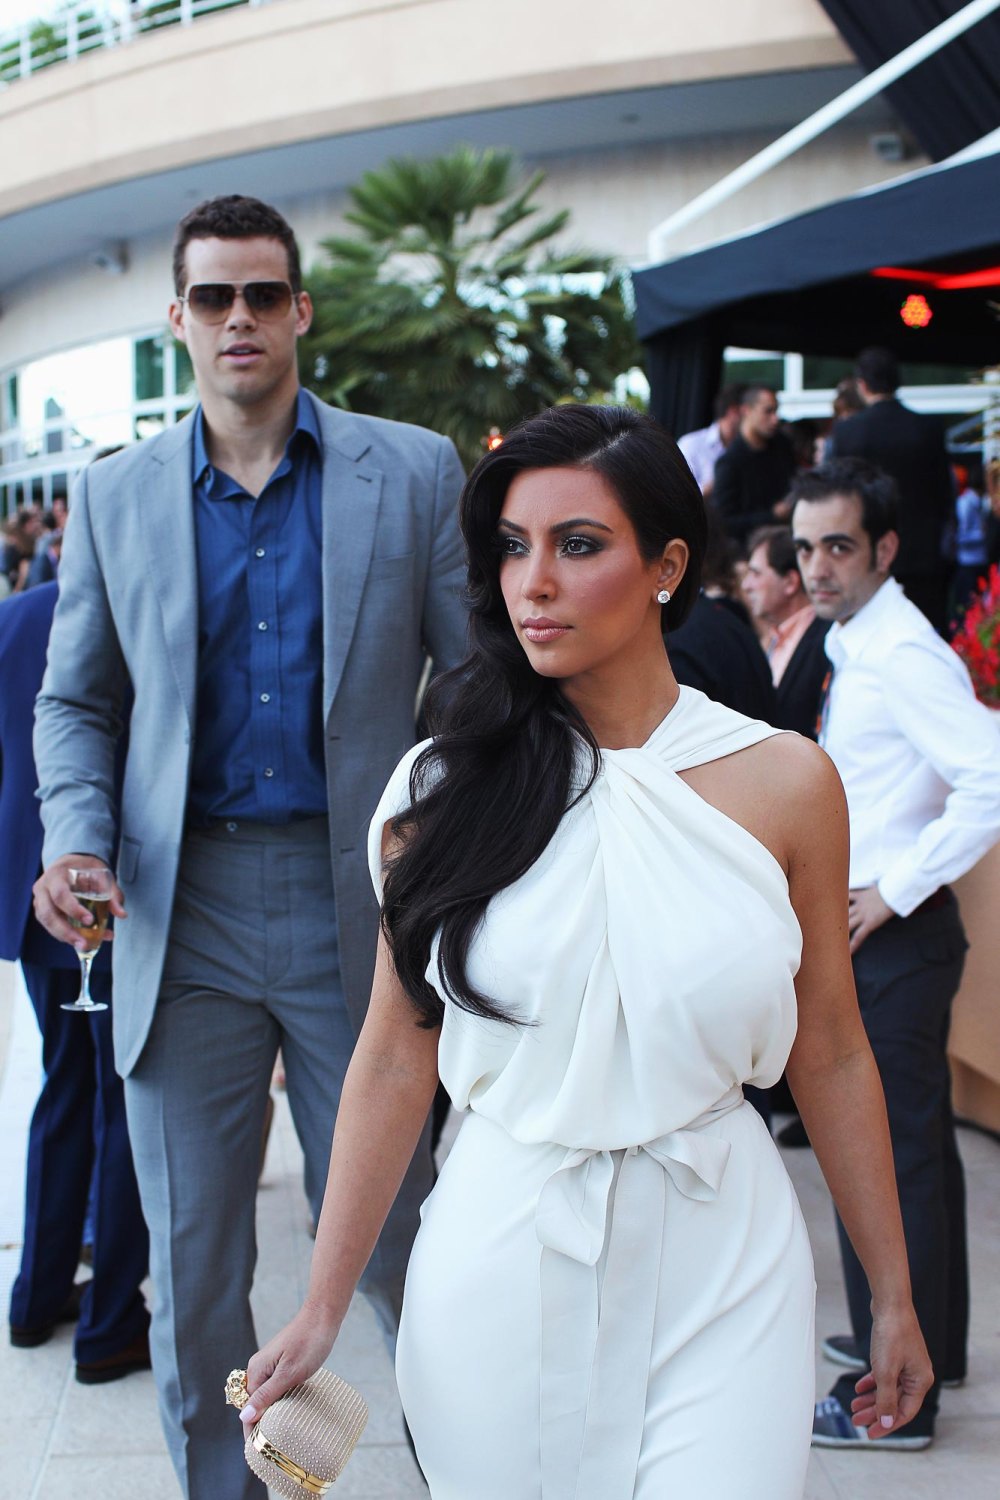 Gerry Turner and Theresa Nist are not alone 11 celebrity couples who were married for less than 100 days 667 Kim Kardashian and Kris Humphries